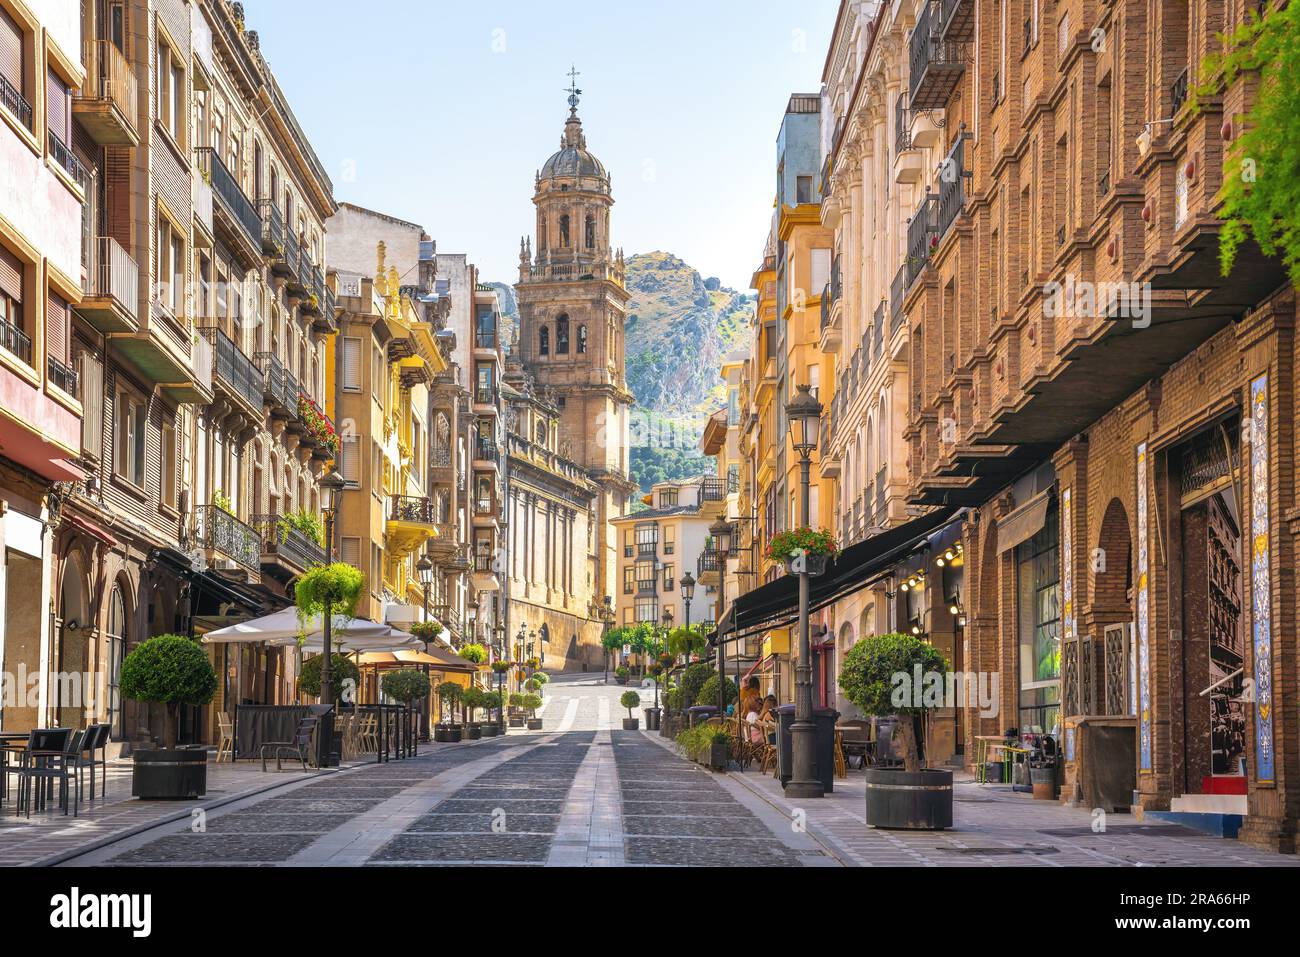 Bernabe Soriano Street and Jaen Cathedral - Jaen, Spain Stock Photo